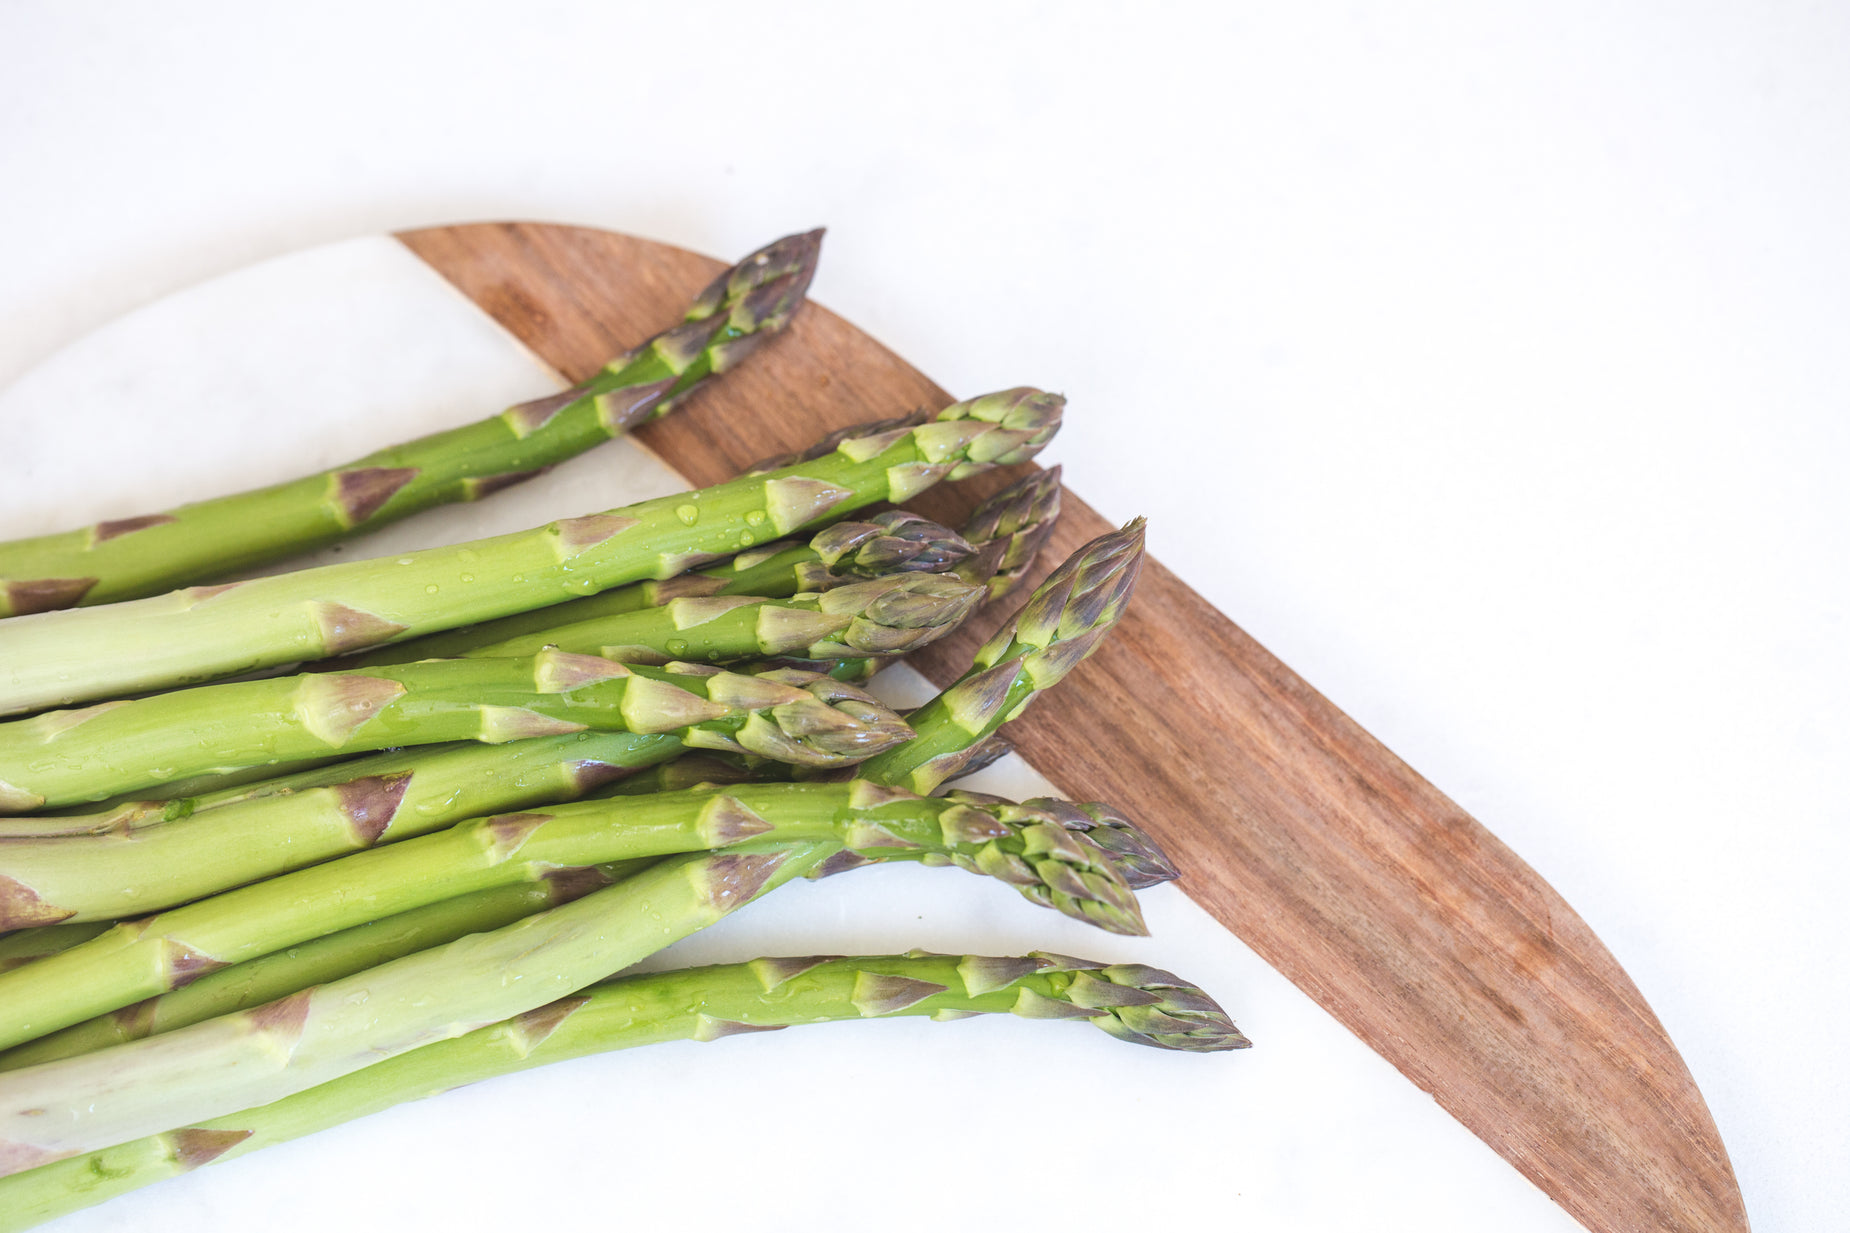 there are some asparagus that are sitting on a board